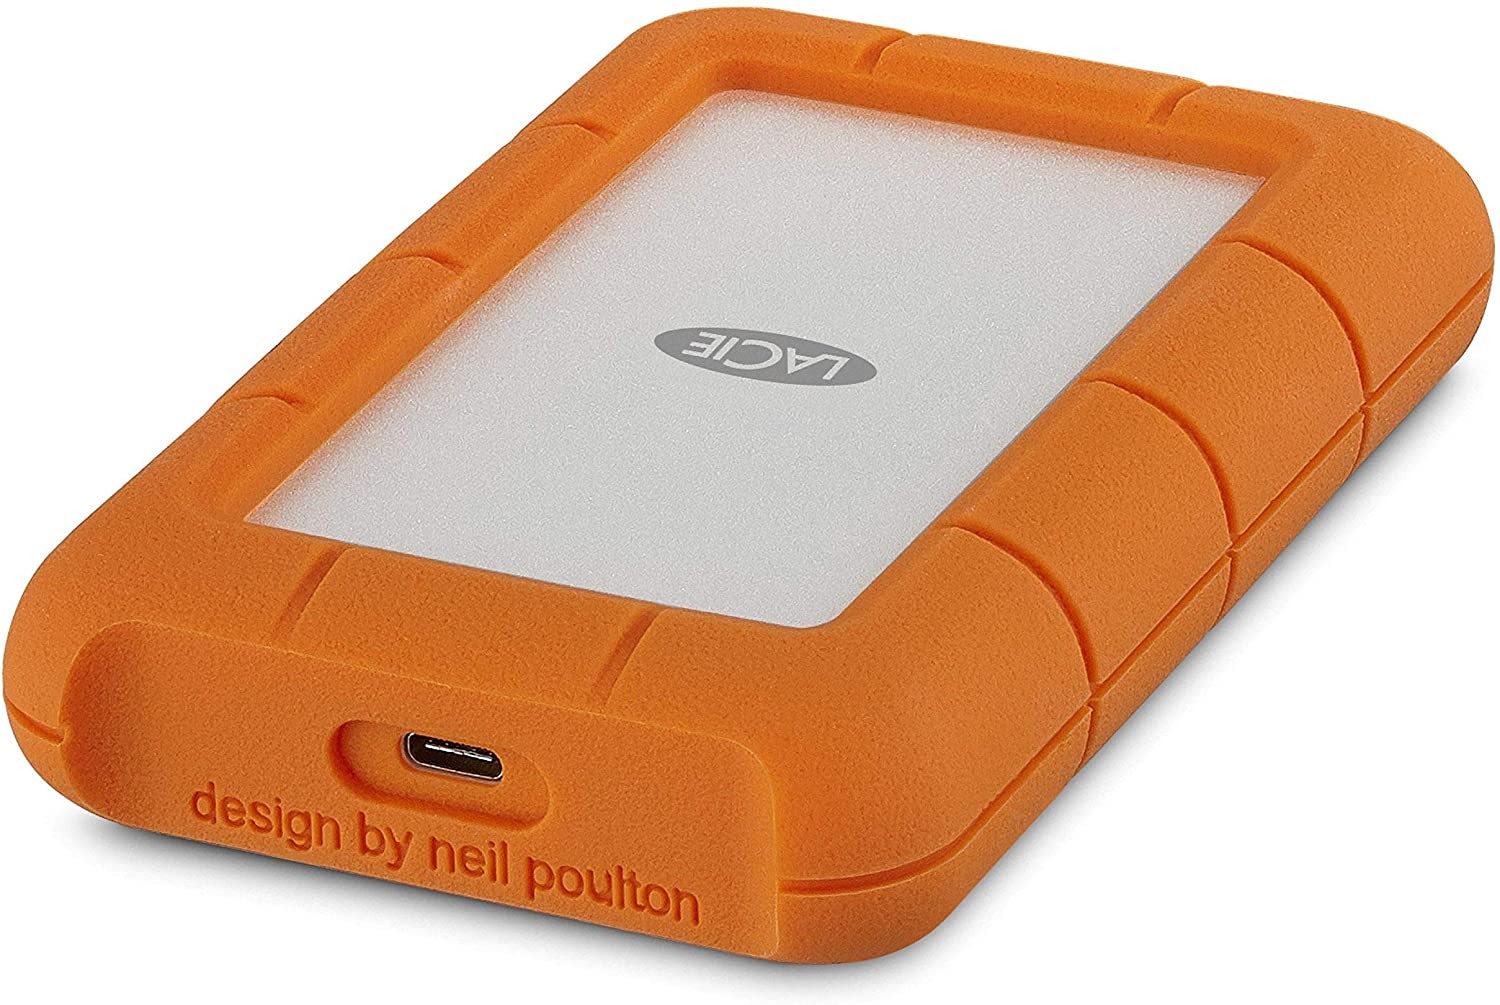 LaCie Rugged Mini SSD Review: Power-Efficient Flash Storage at 20 Gbps